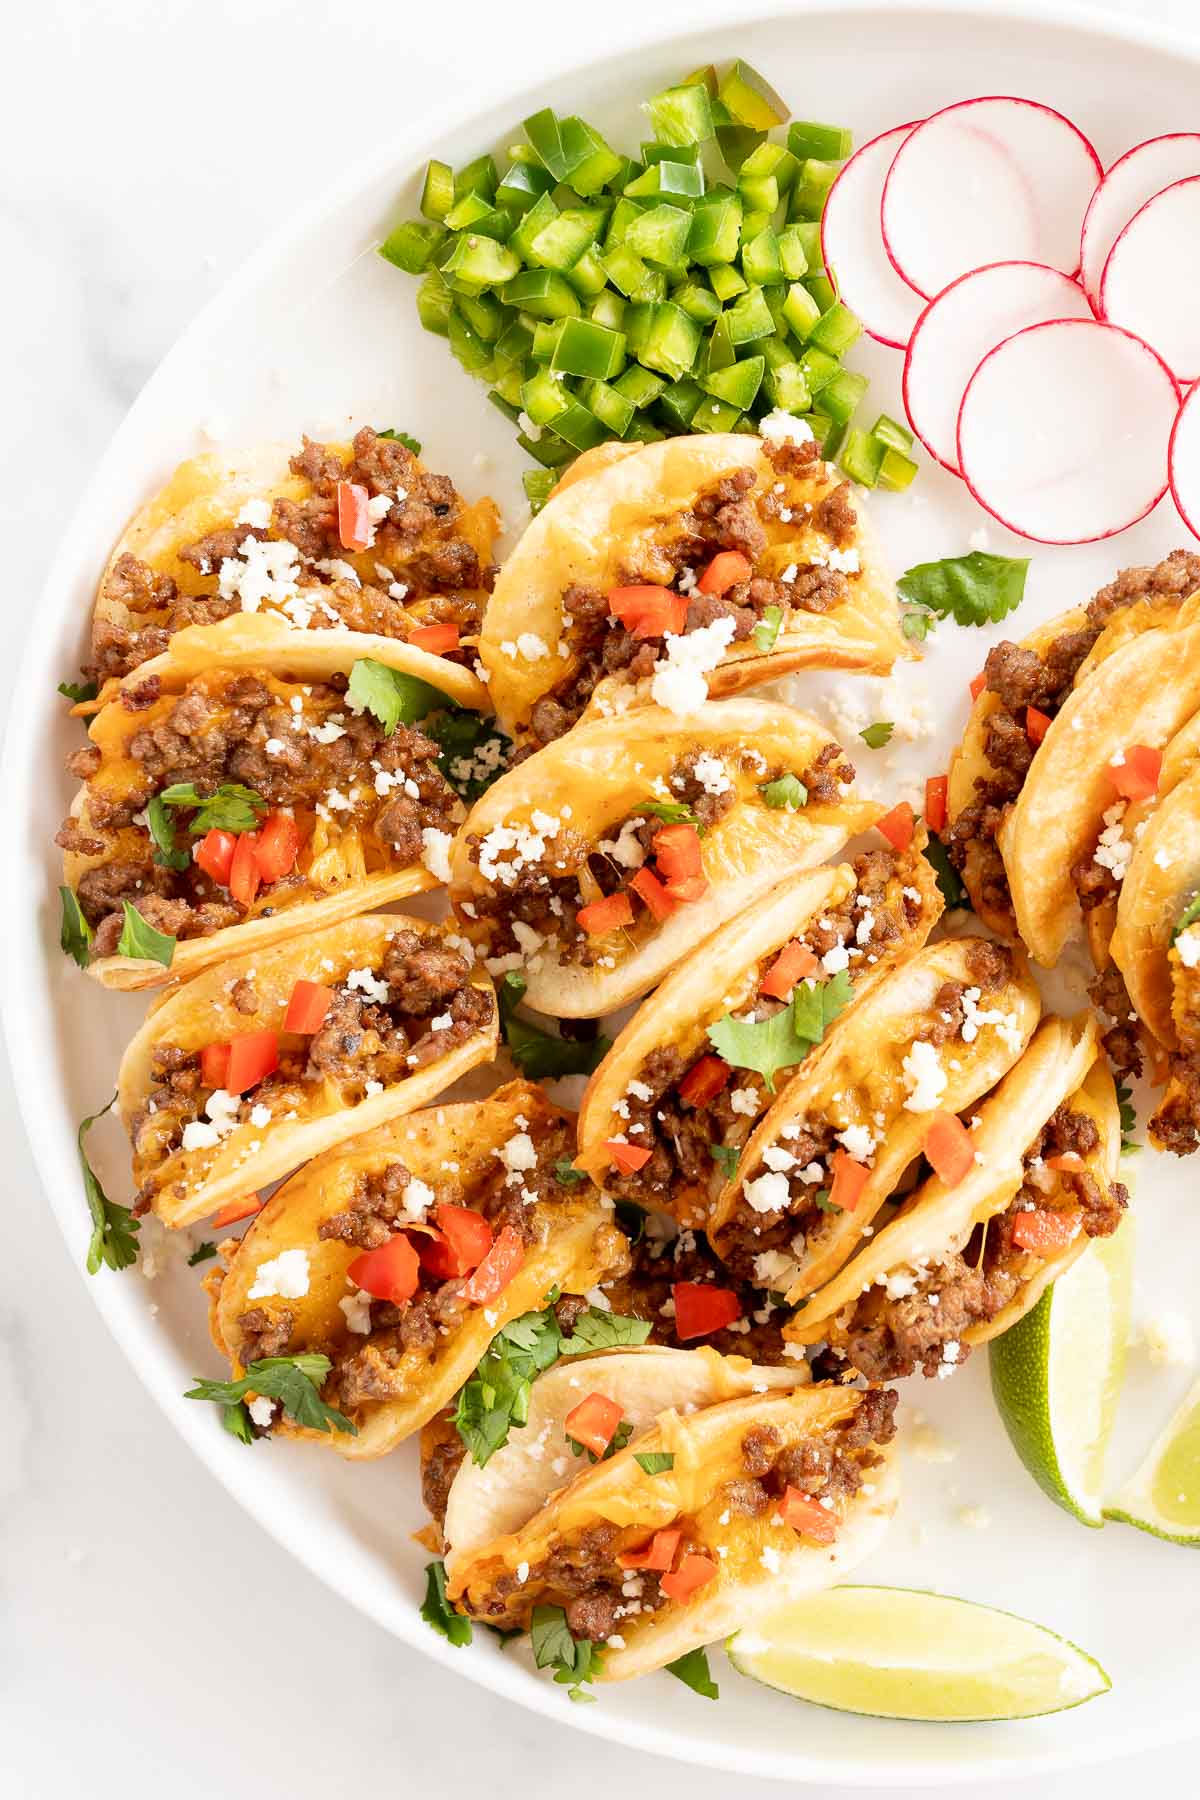 Beef mini tacos on a white platter.